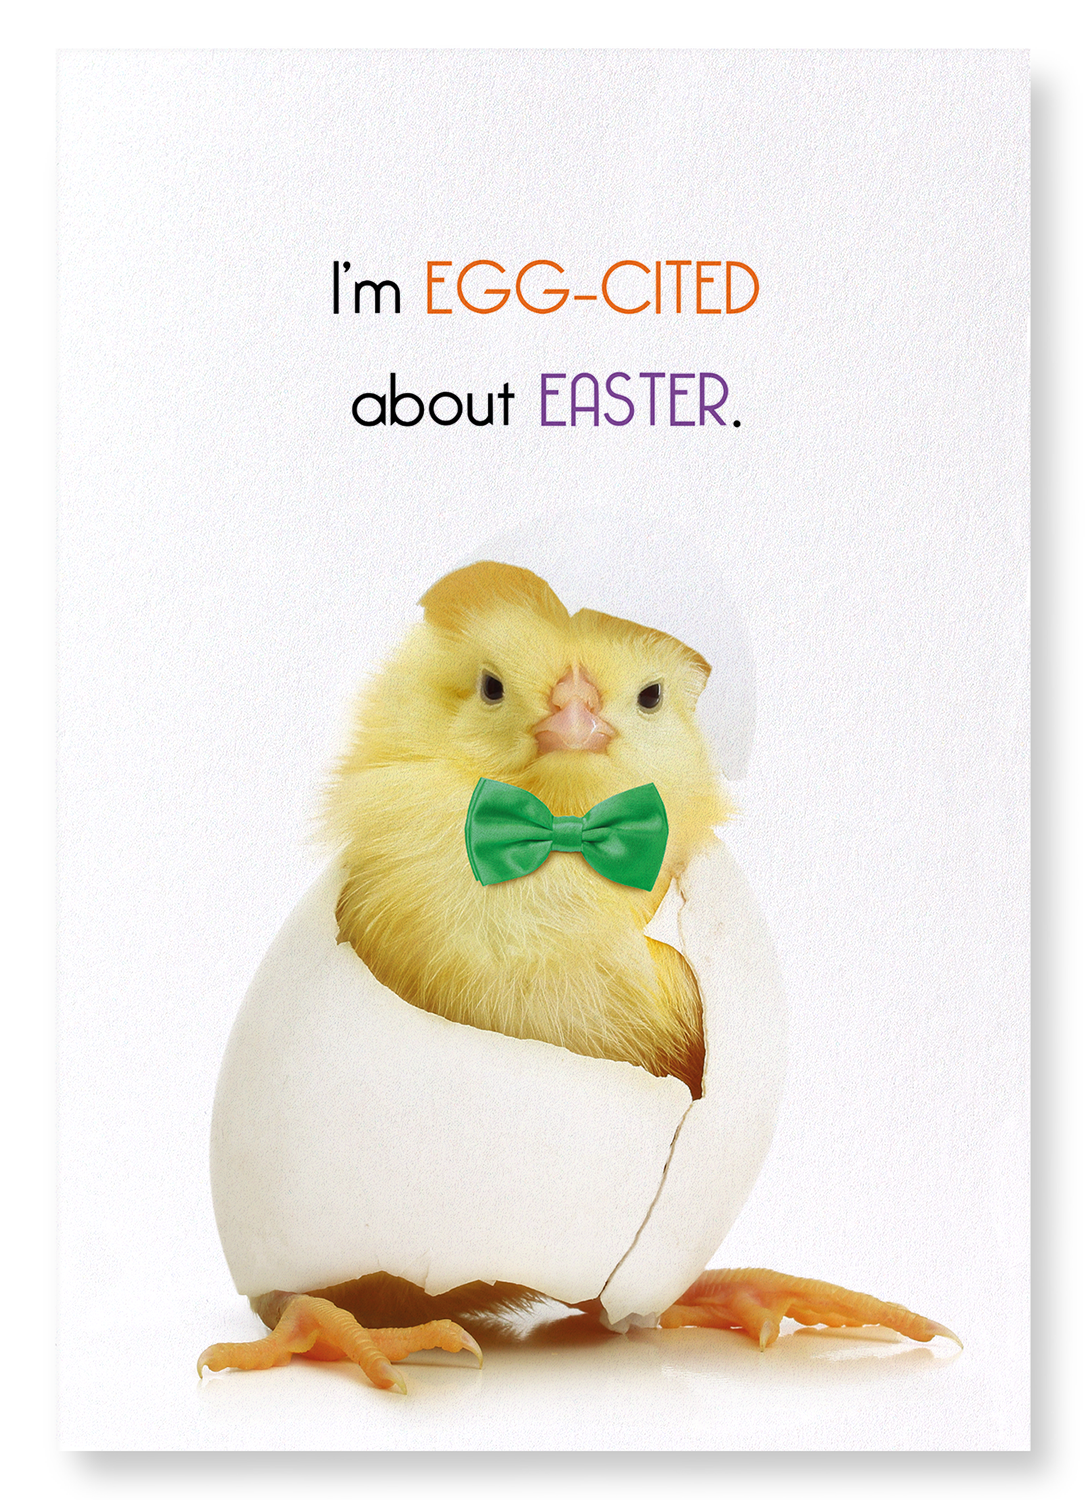 EGG-CITED ABOUT EASTER: Funny Animal Art print